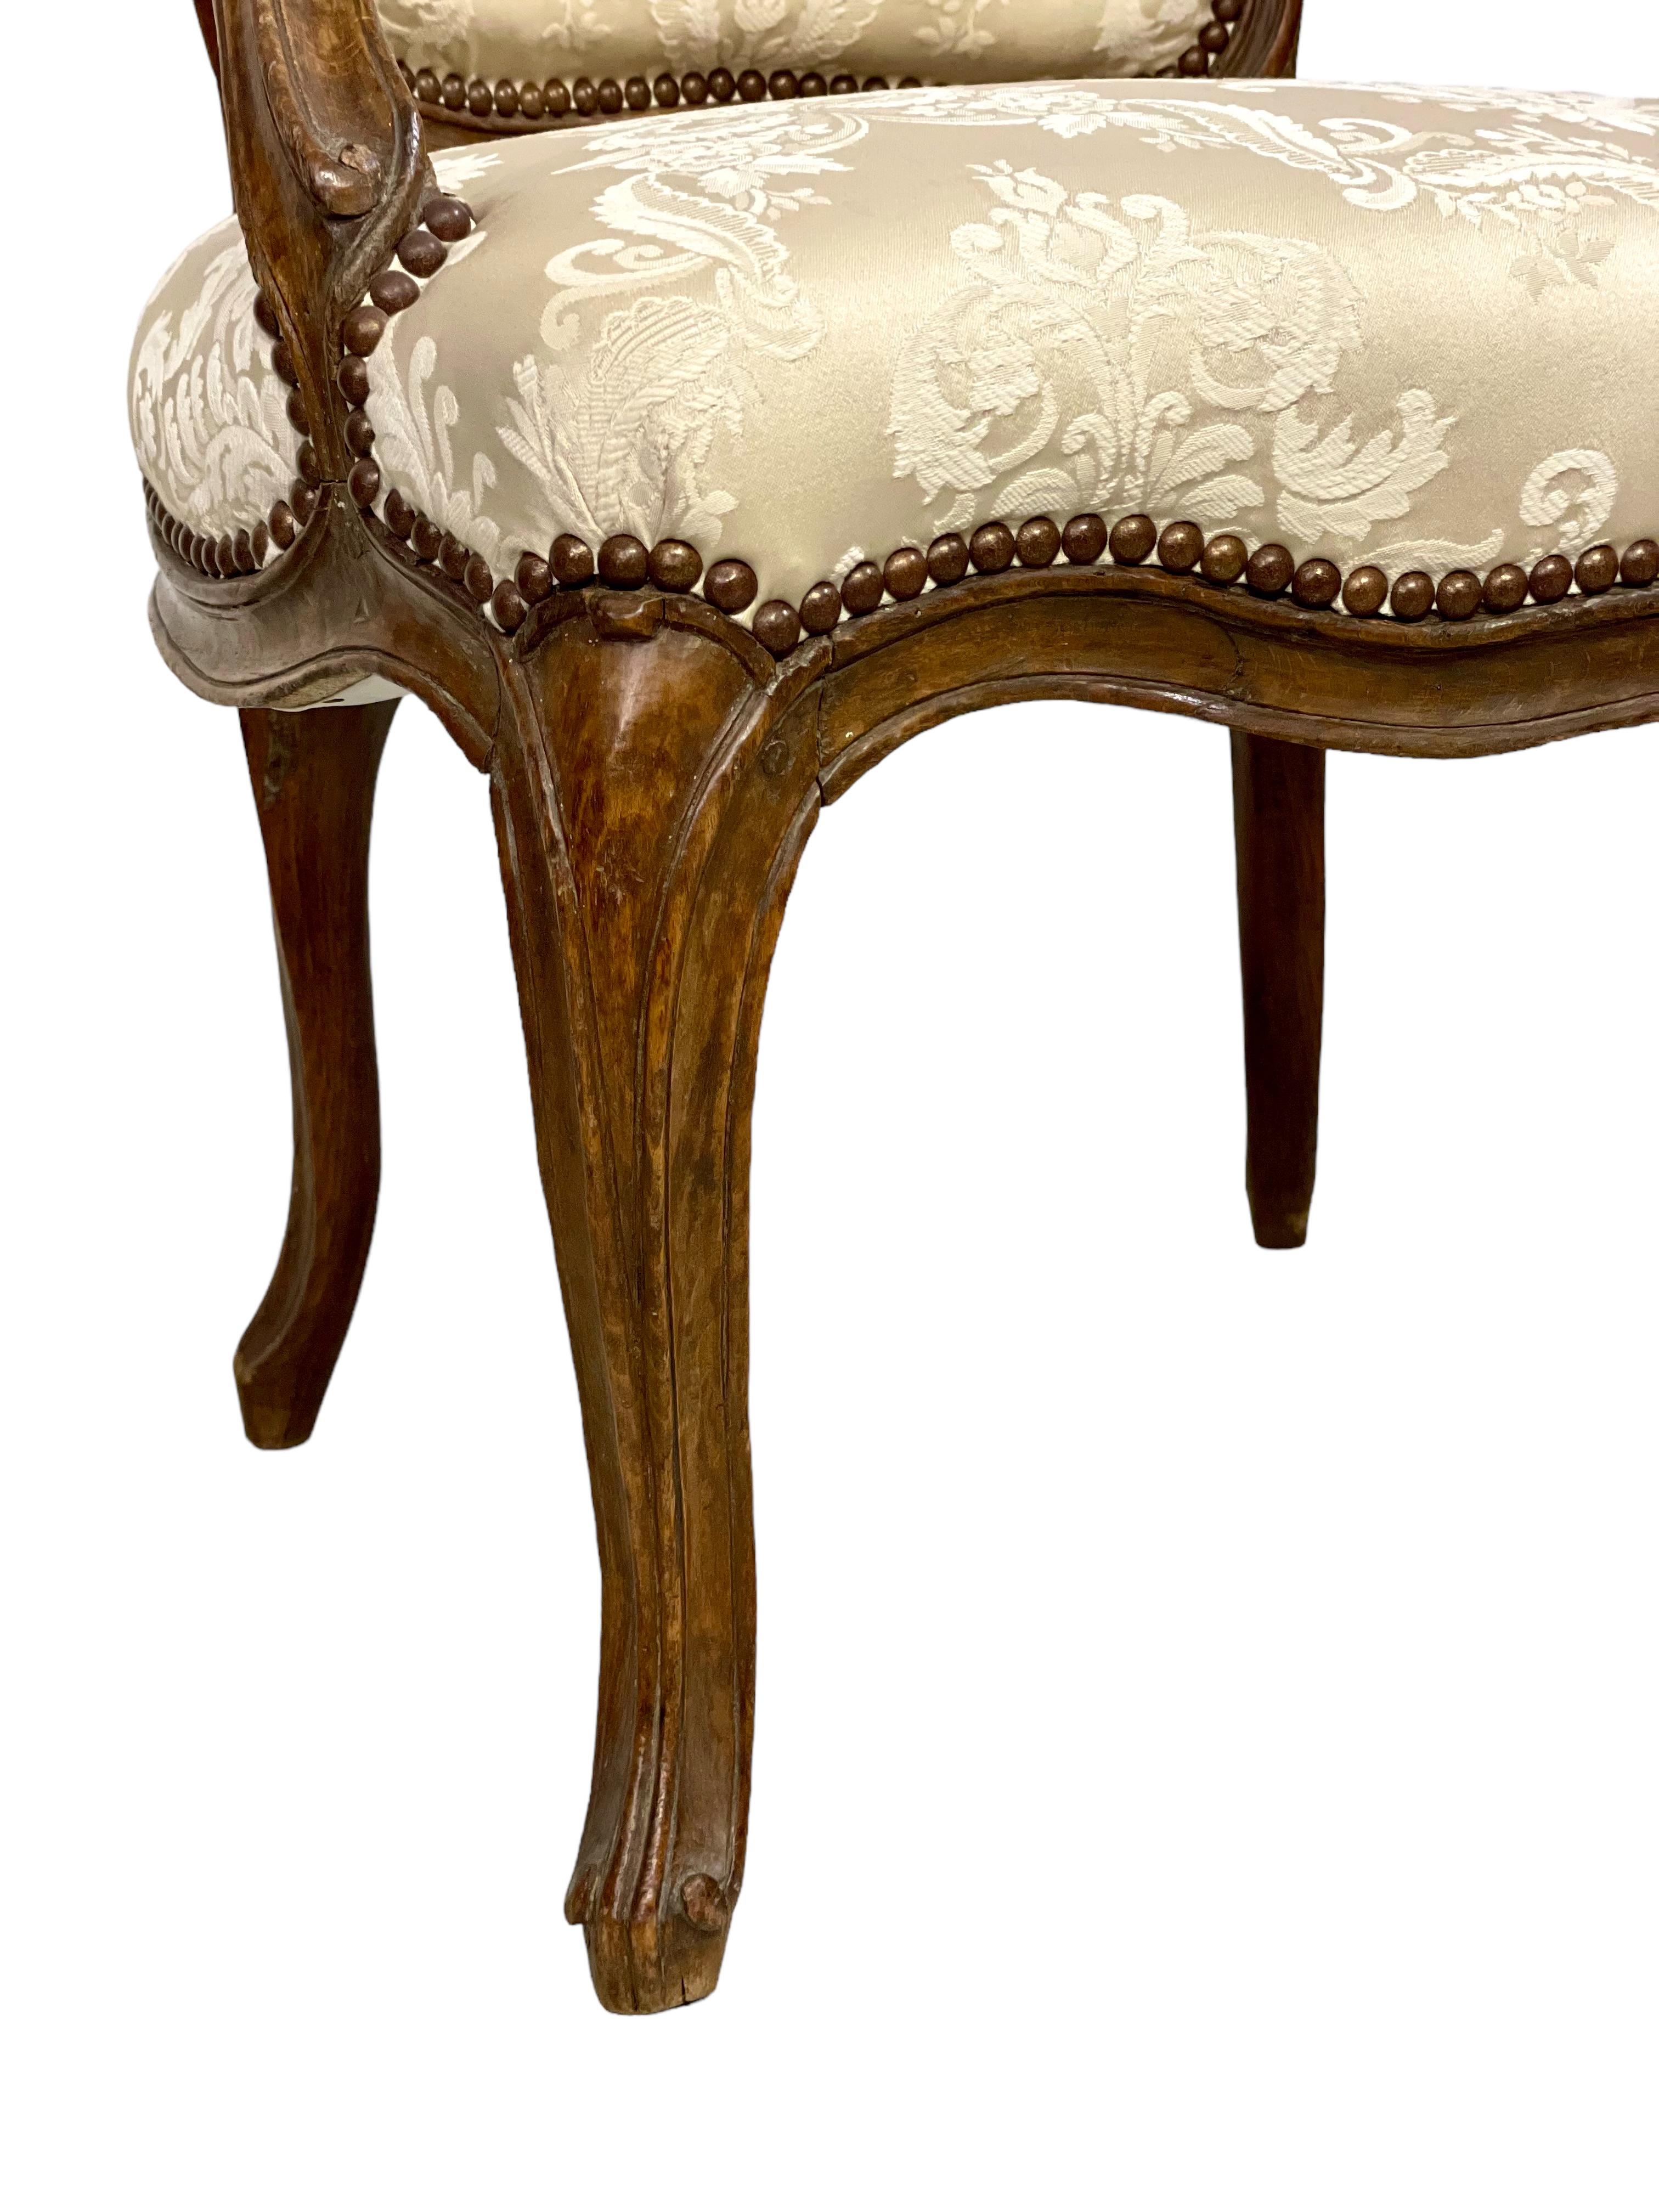 A luxurious Louis XV period armchair in beautifully carved and moulded walnut, with ornate scroll-carved arm rests and supports. This elegant 'Fauteuil à la Reine' dates from the 18th century, and has a padded, slightly inclined back and overstuffed